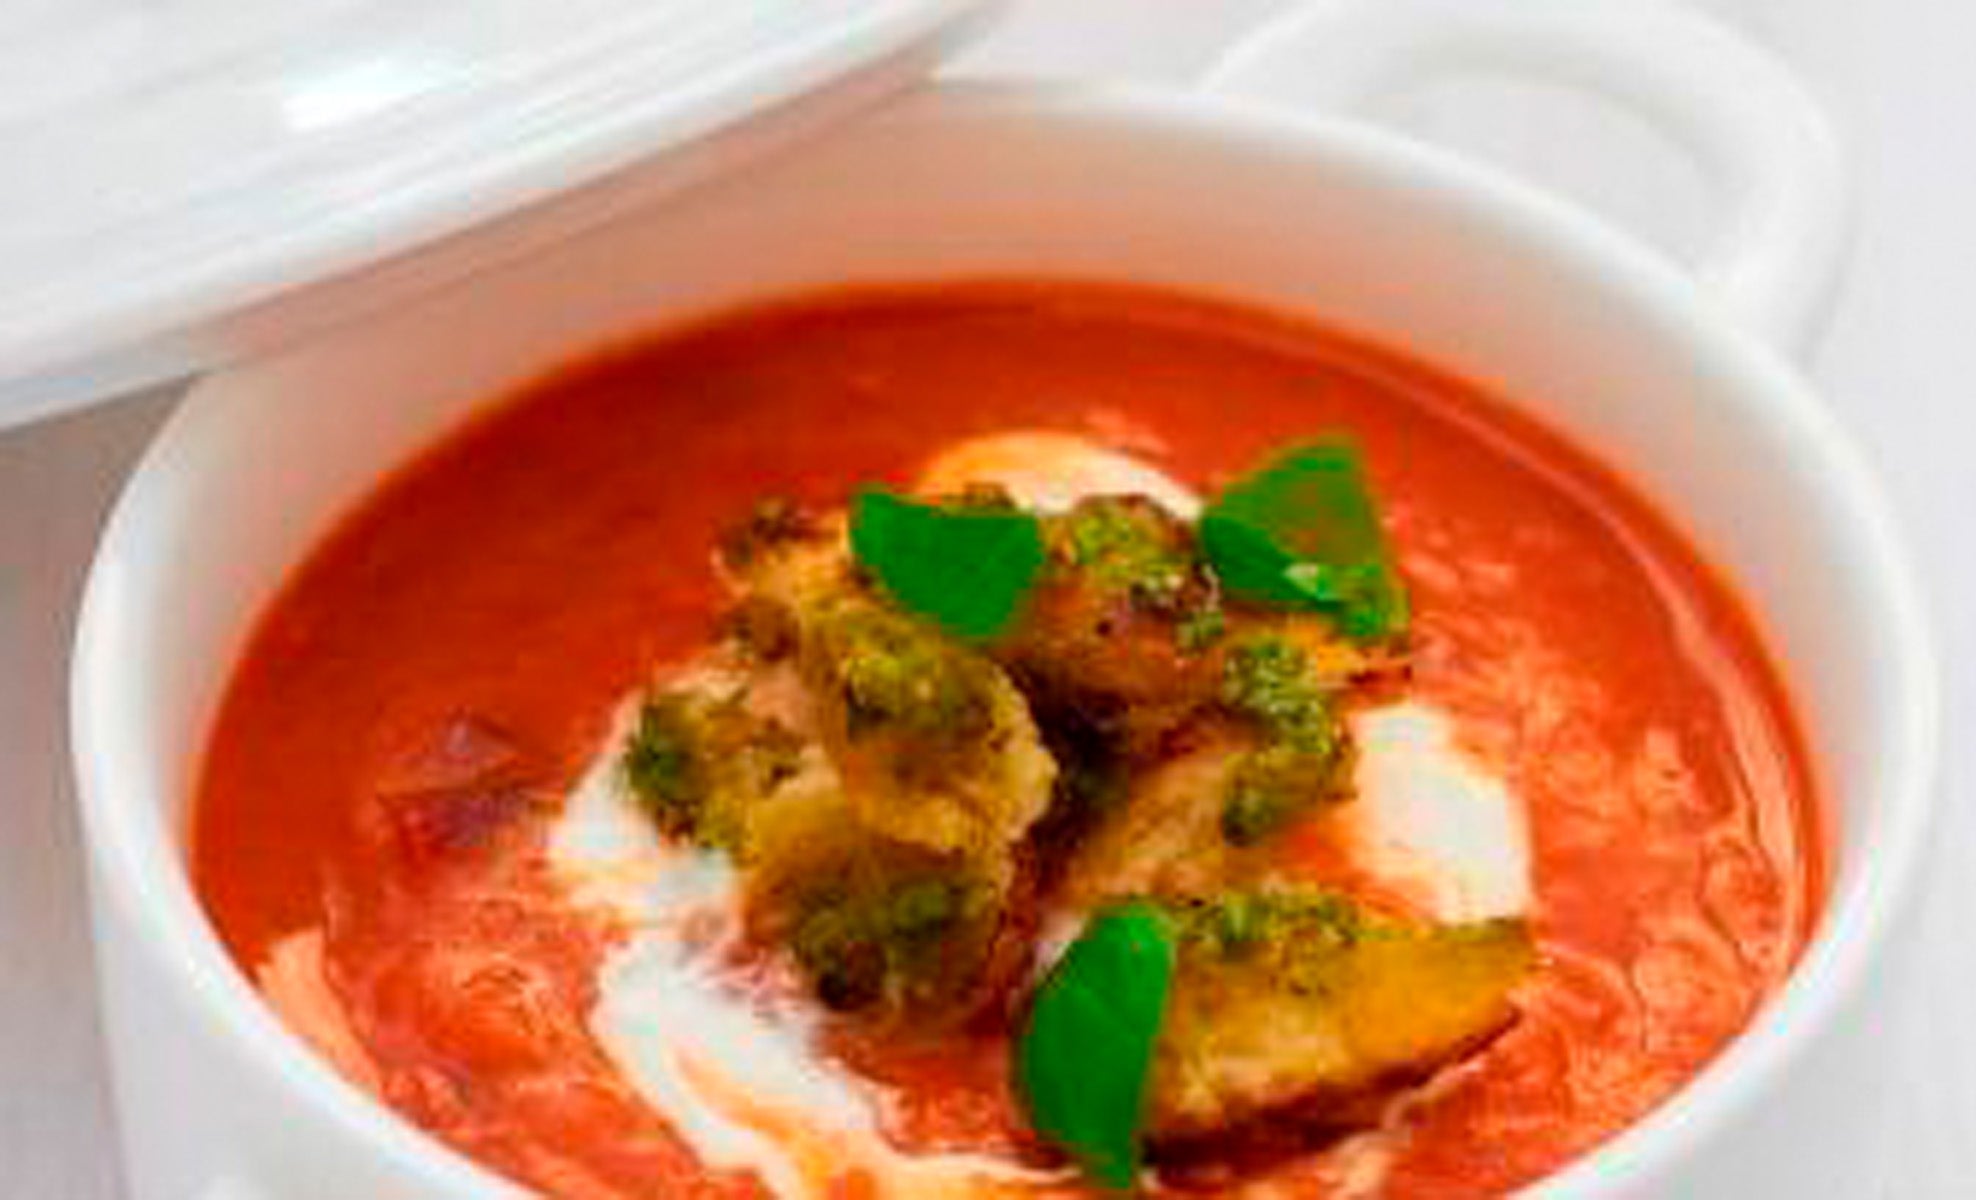 Roasted Tomato Soup with Pesto Croutons